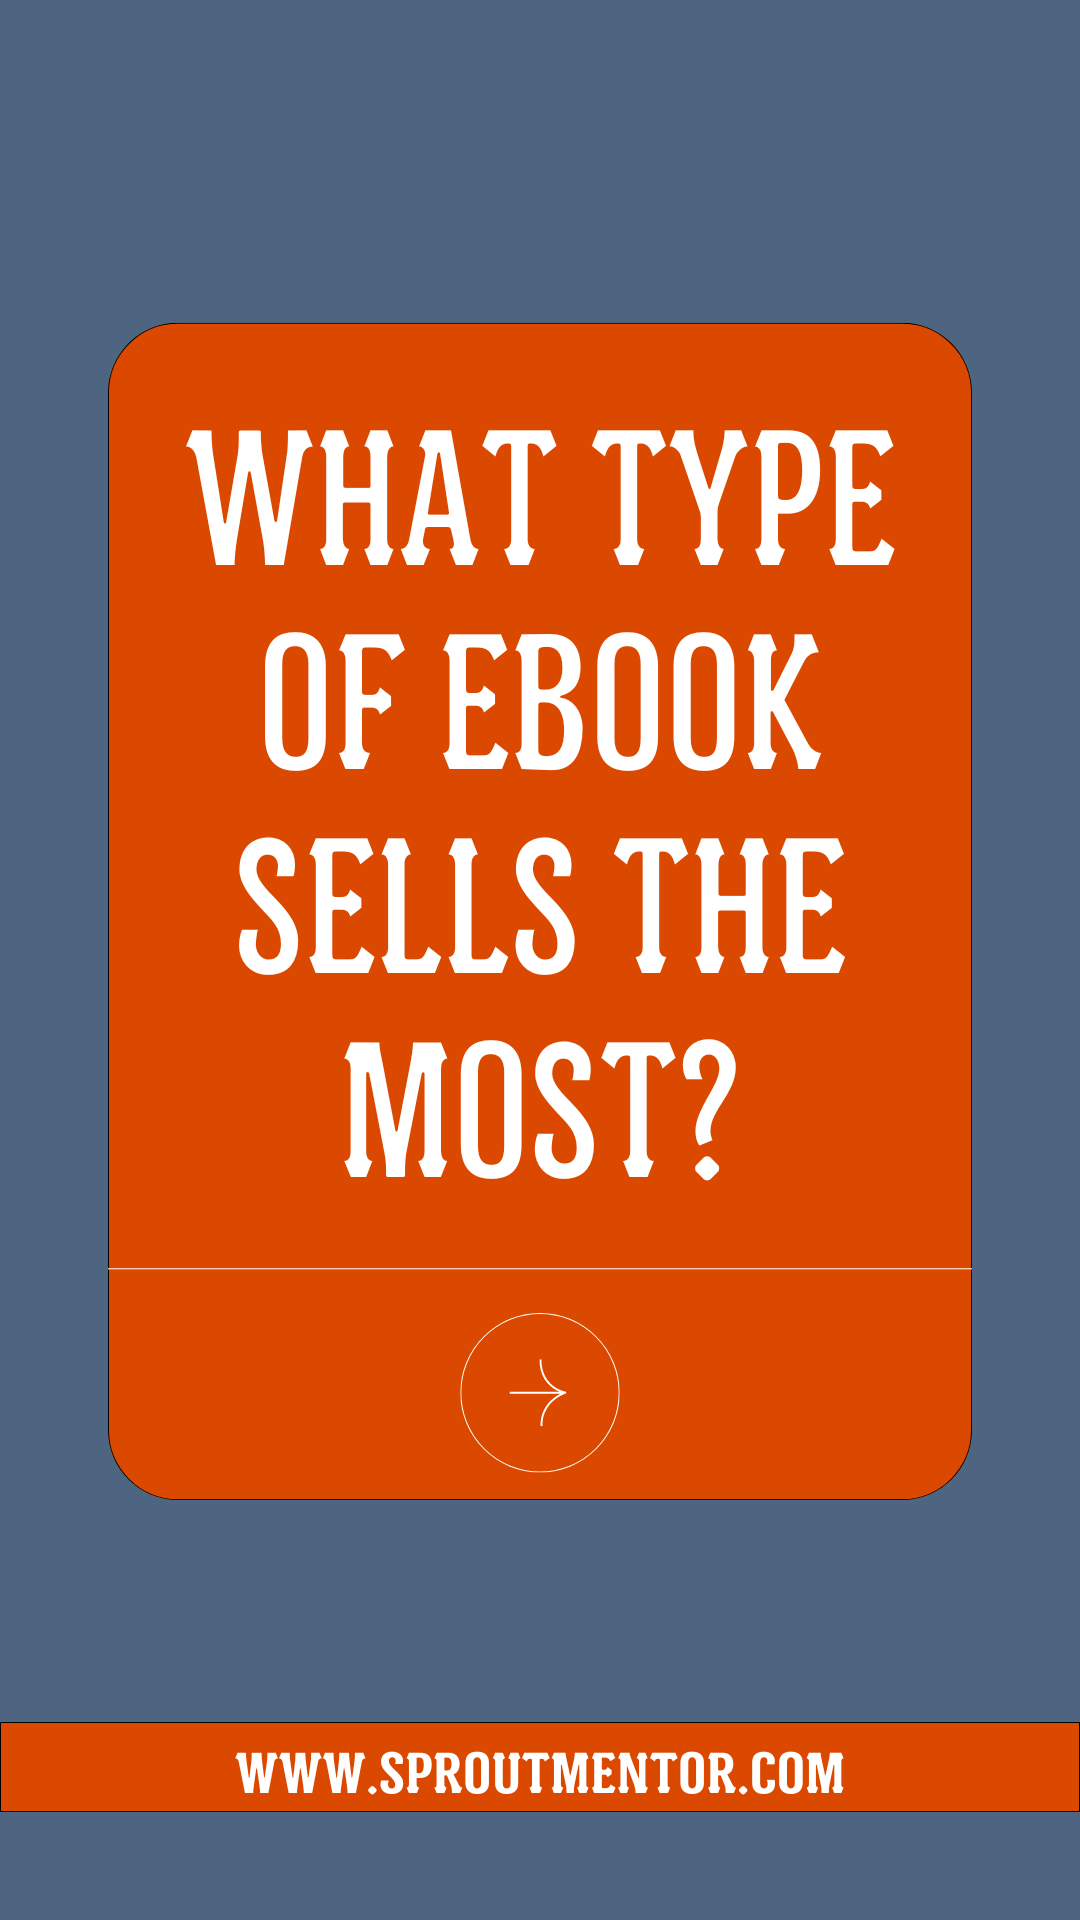 What Type of Ebook Sells the Most?